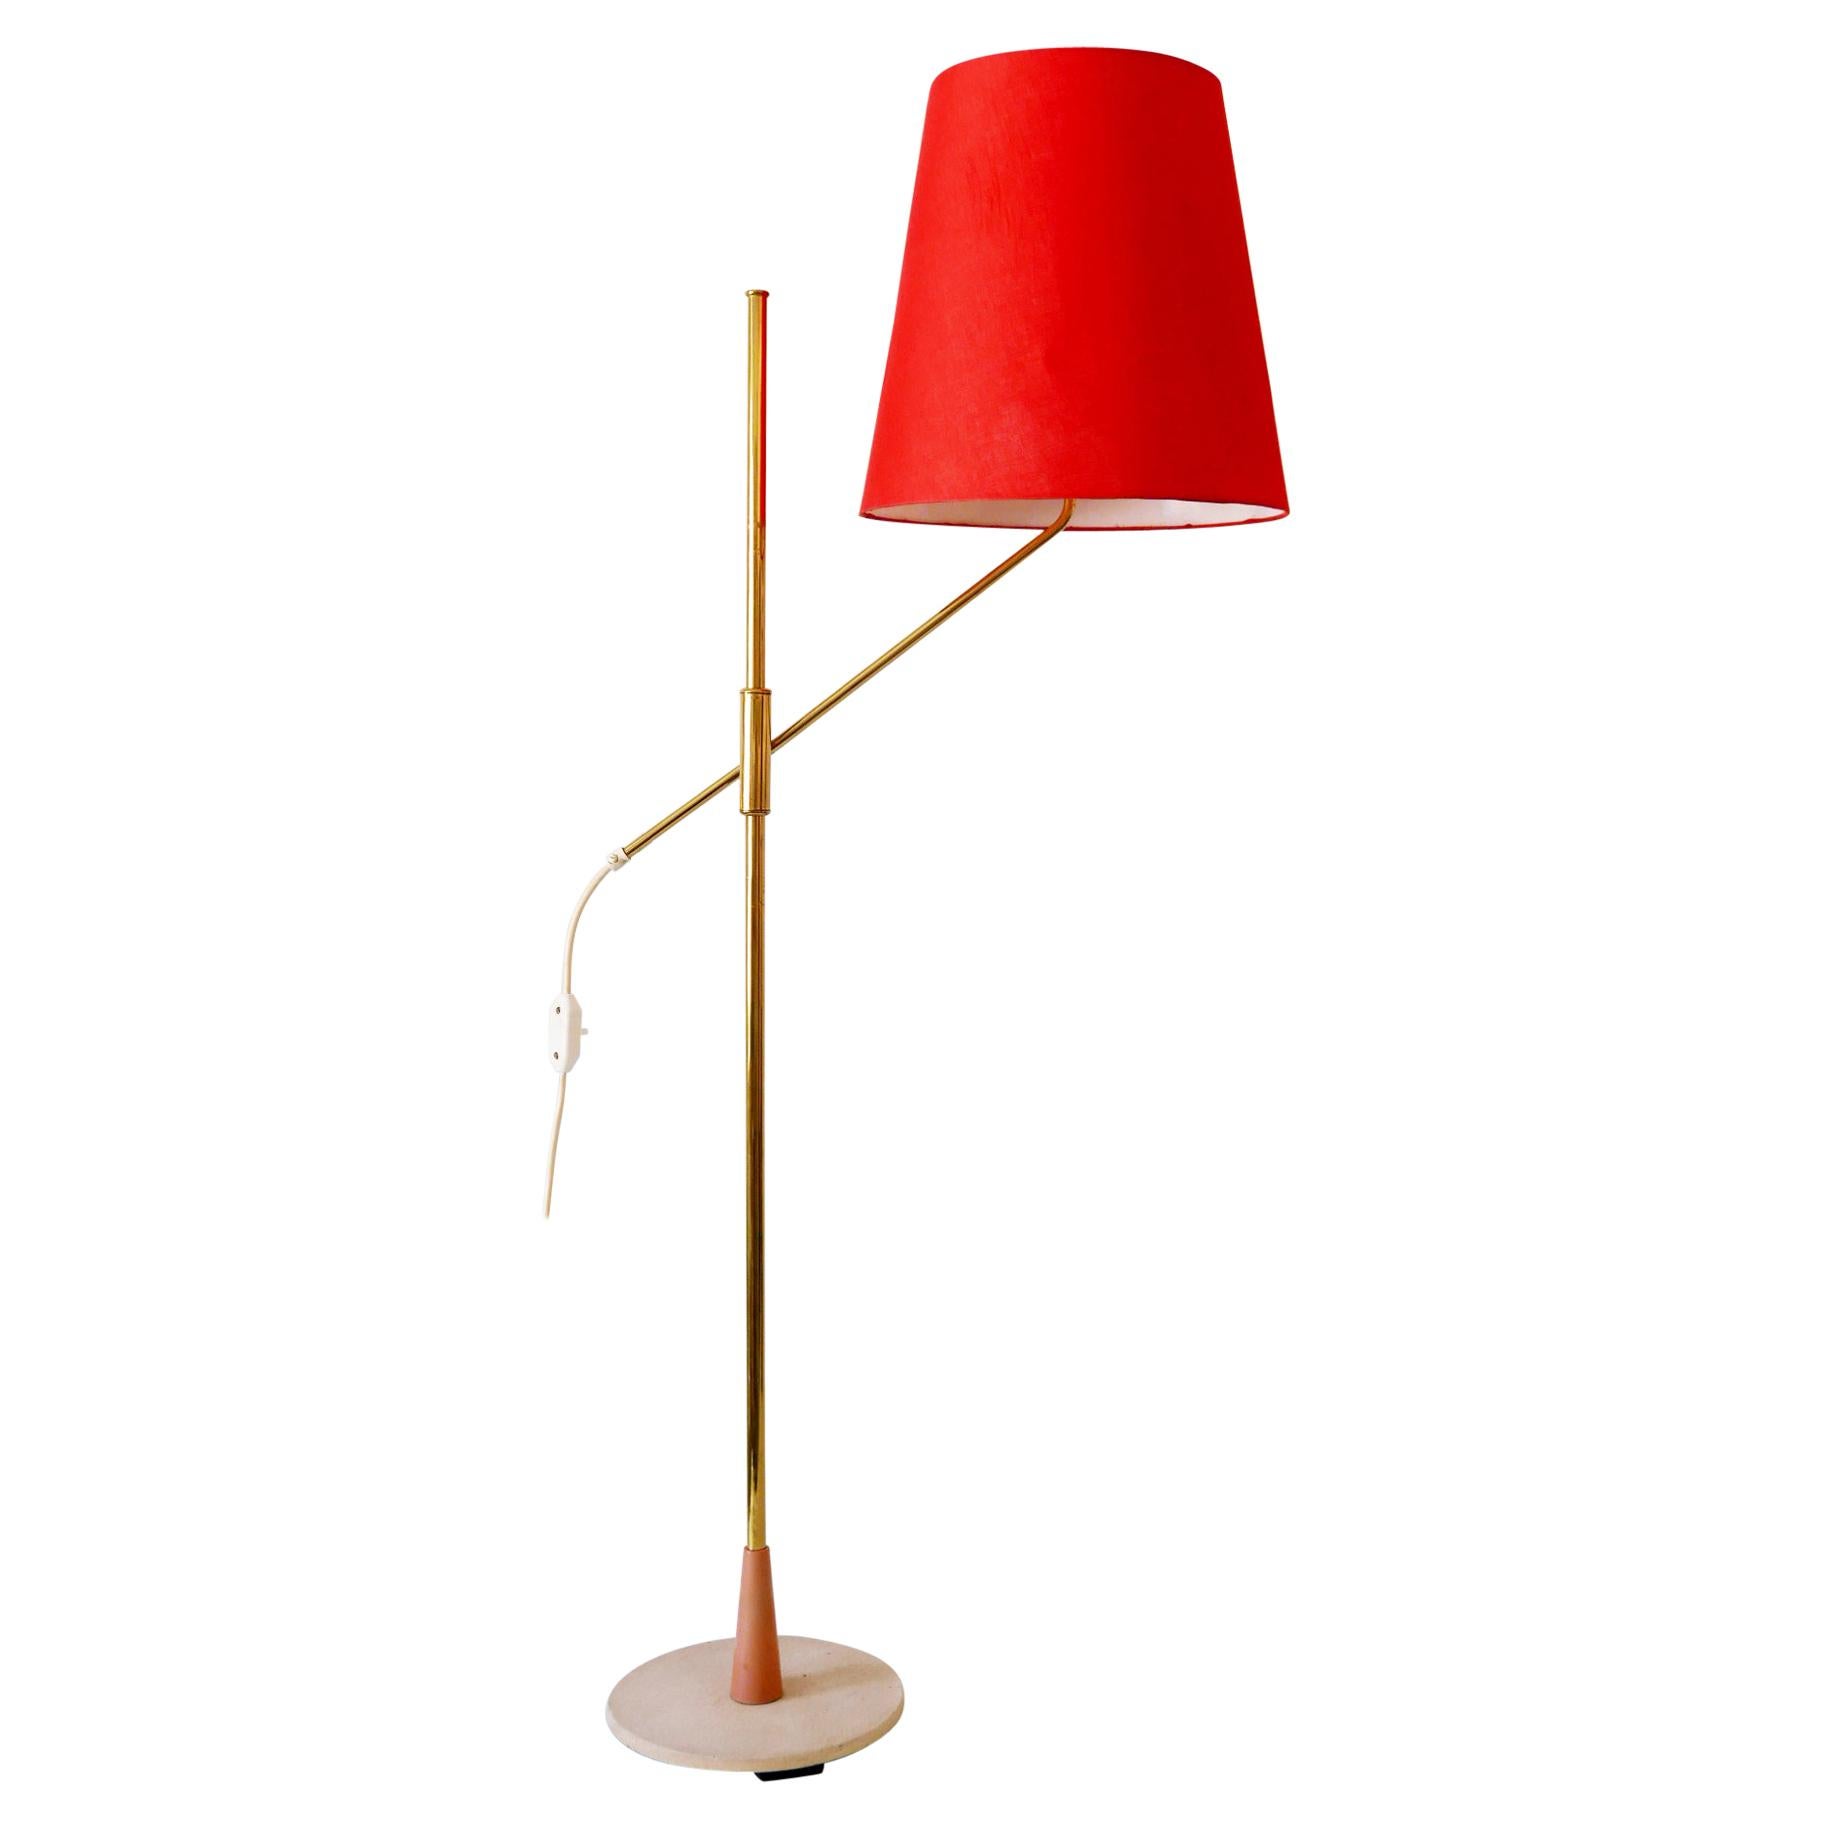 Exceptional, Elegant and Adjustable Mid-Century Modern Floor Lamp 1950s, Germany For Sale